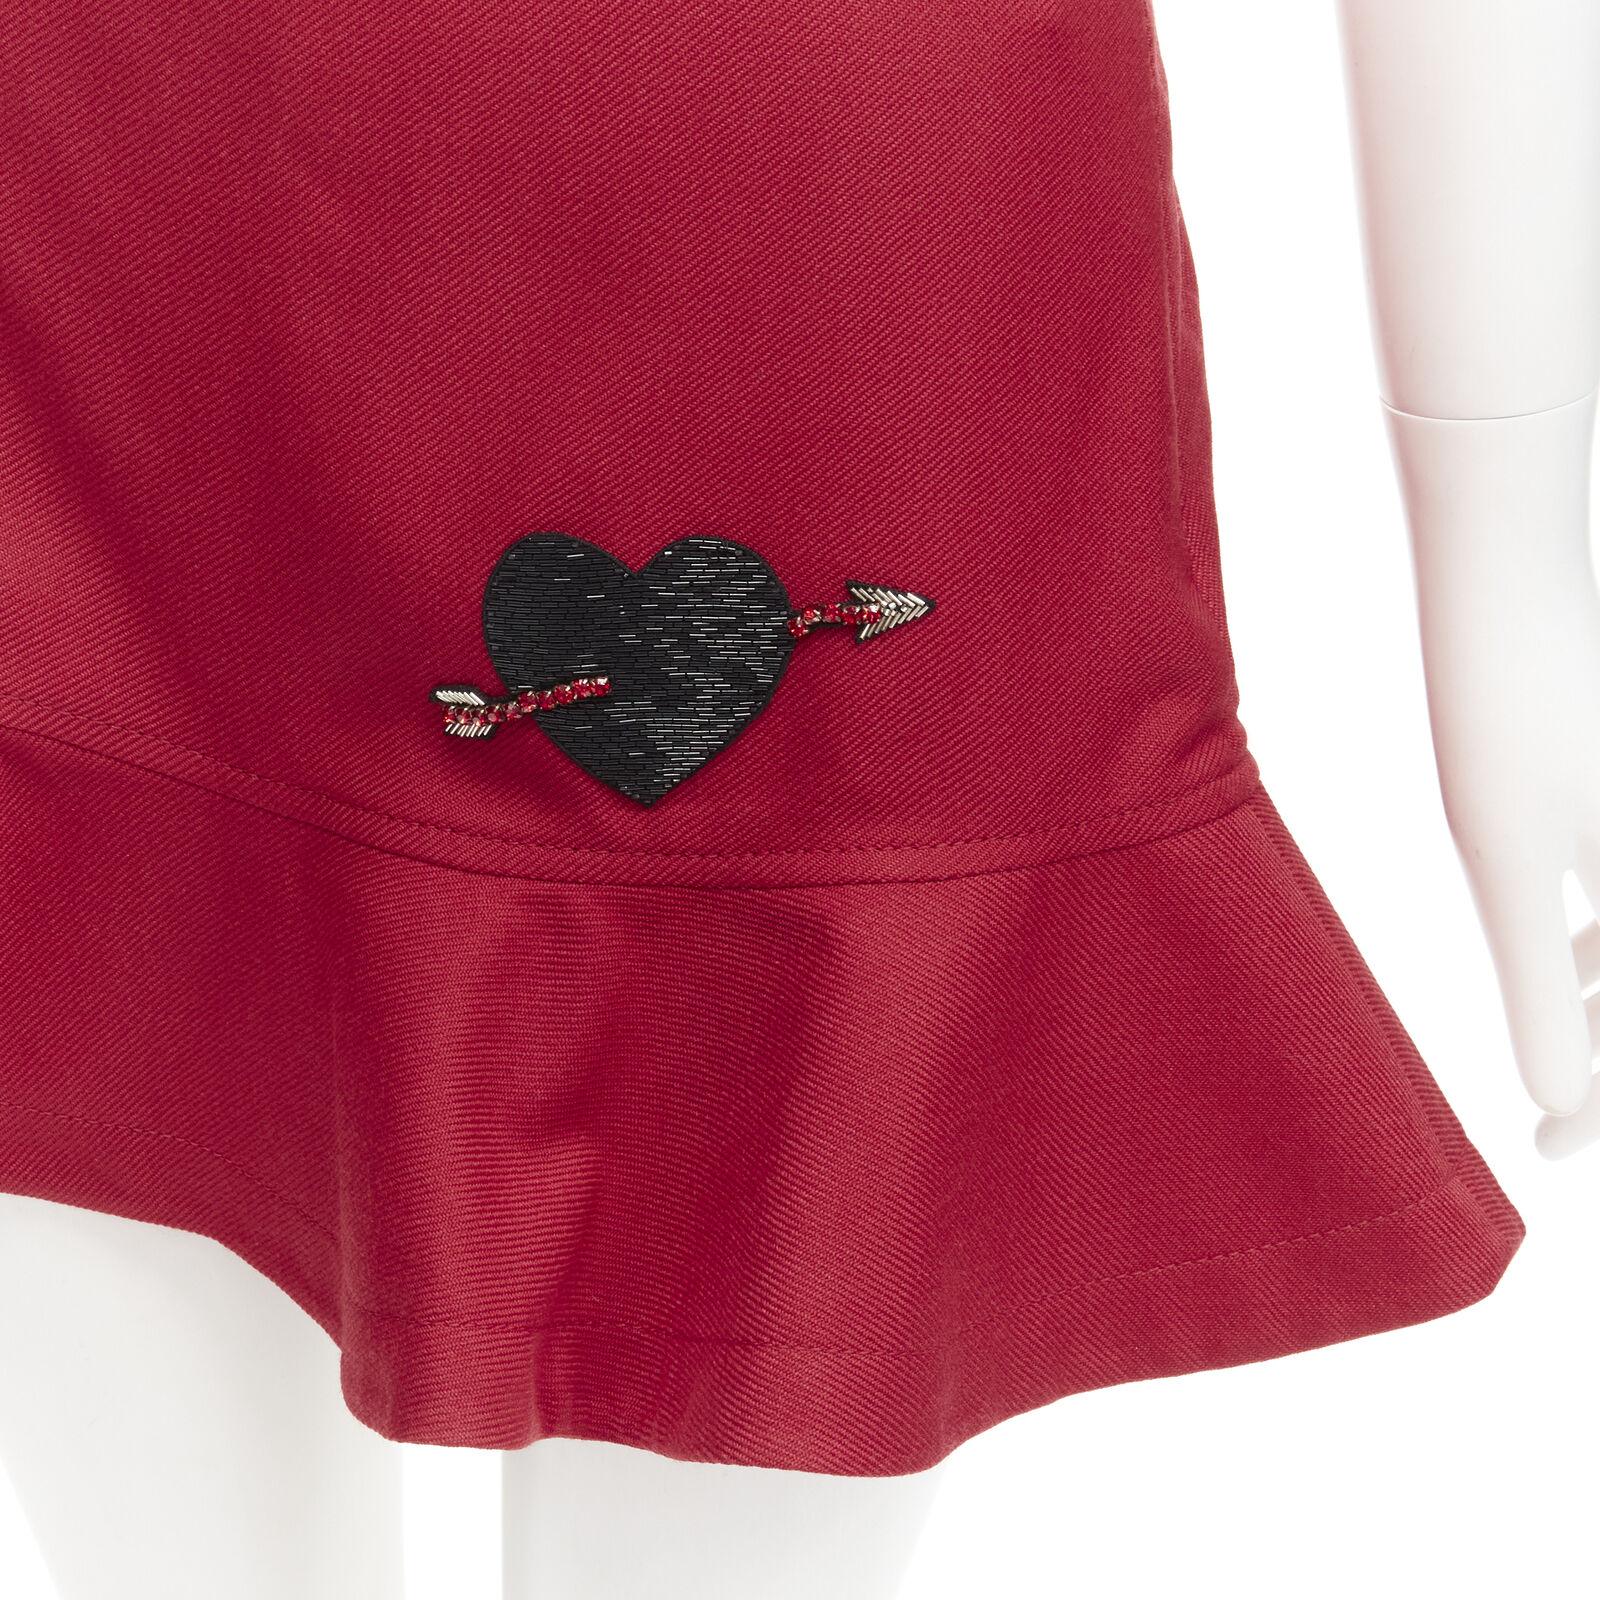 VALENTINO black beaded heart badge red twill flared frill shorts IT38 XS
Reference: AAWC/A00371
Brand: Valentino
Designer: Pier Paolo Piccioli
Material: Polyester, Virgin Wool
Color: Red, Black
Pattern: Solid
Closure: Zip
Lining: Fabric
Extra